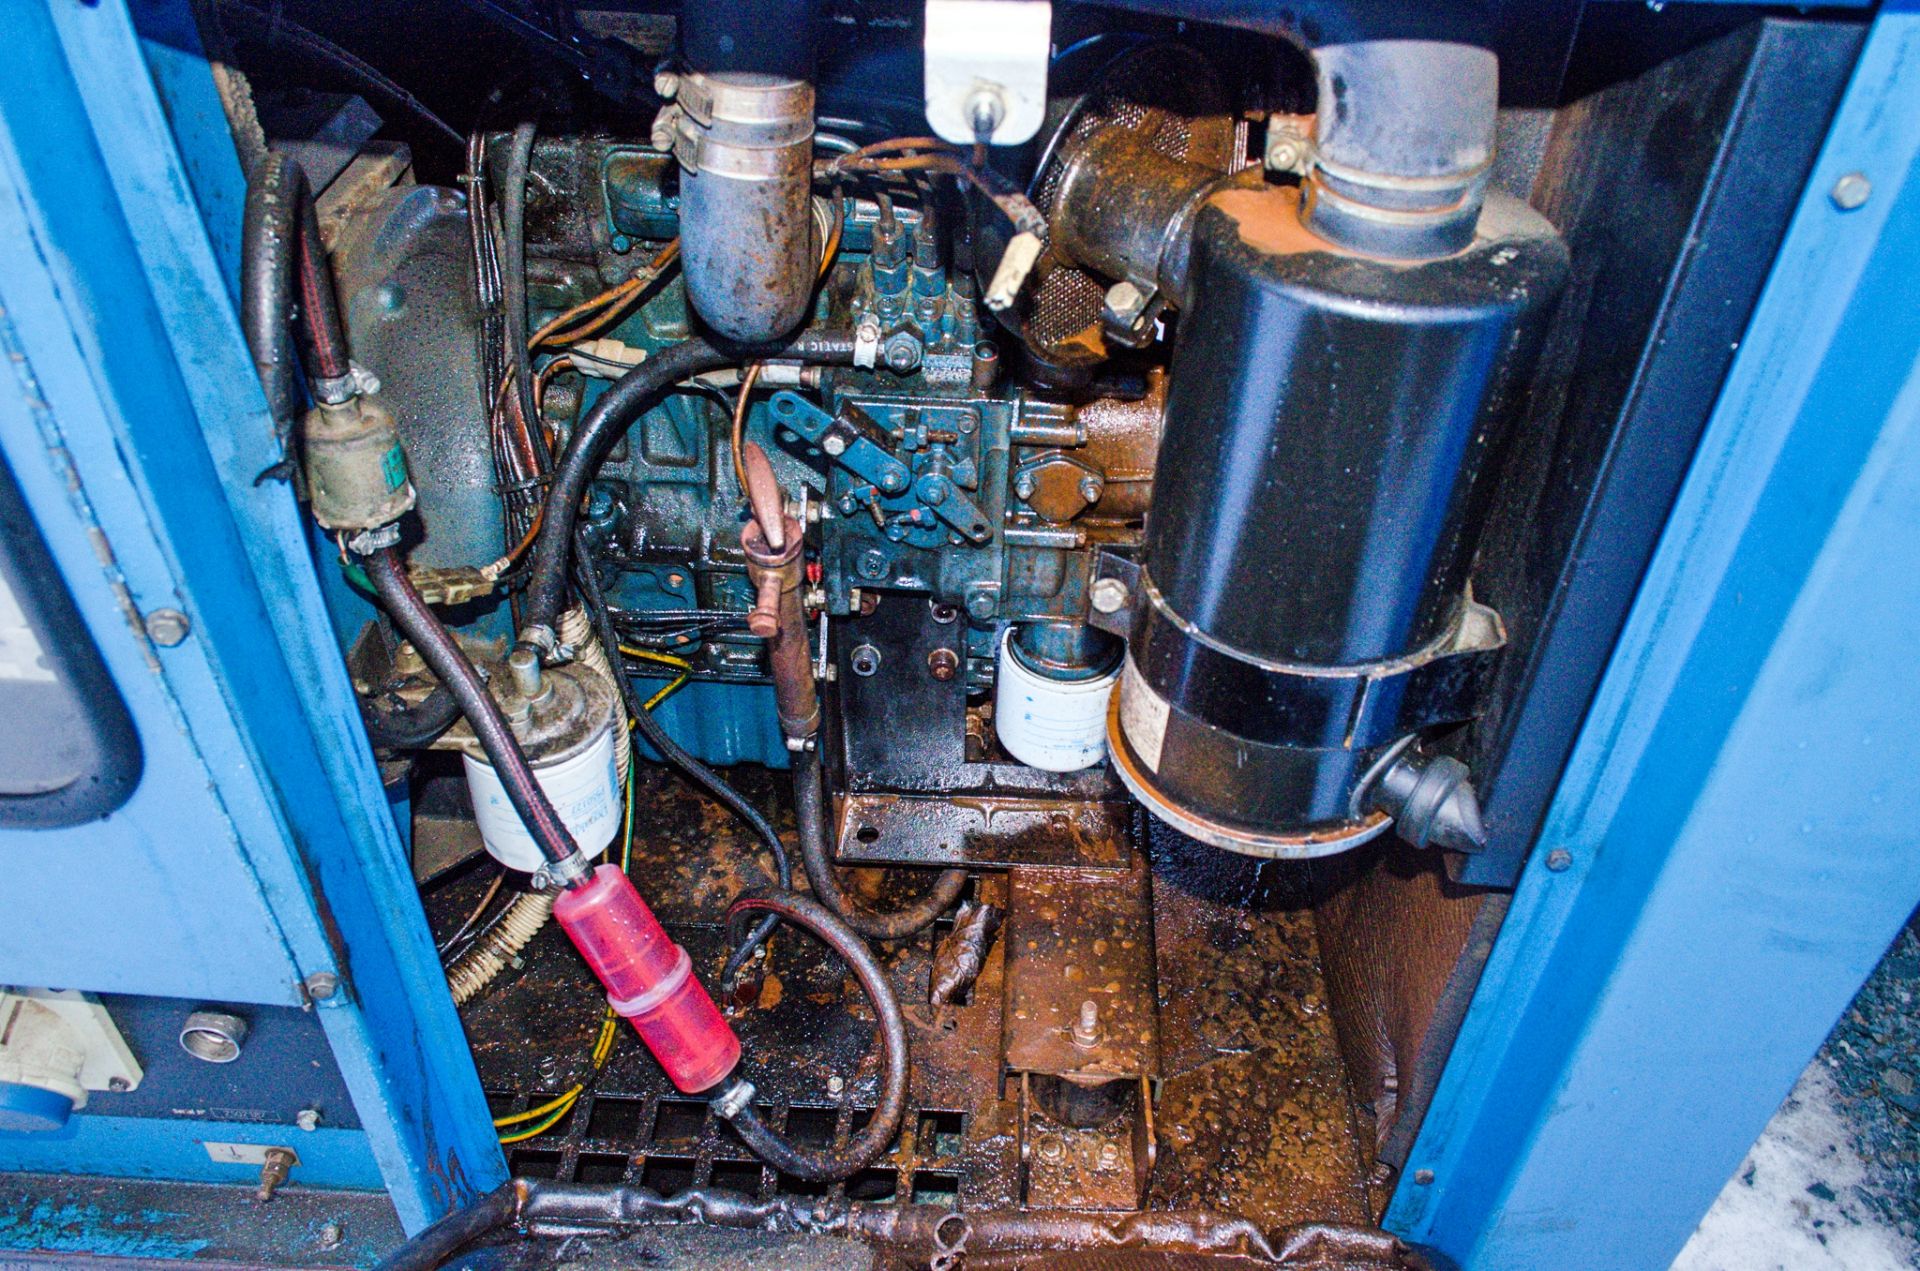 Genset MGMK 10000 10 kva static diesel driven generator Recorded Hours: 11743 MS2753 - Image 4 of 5